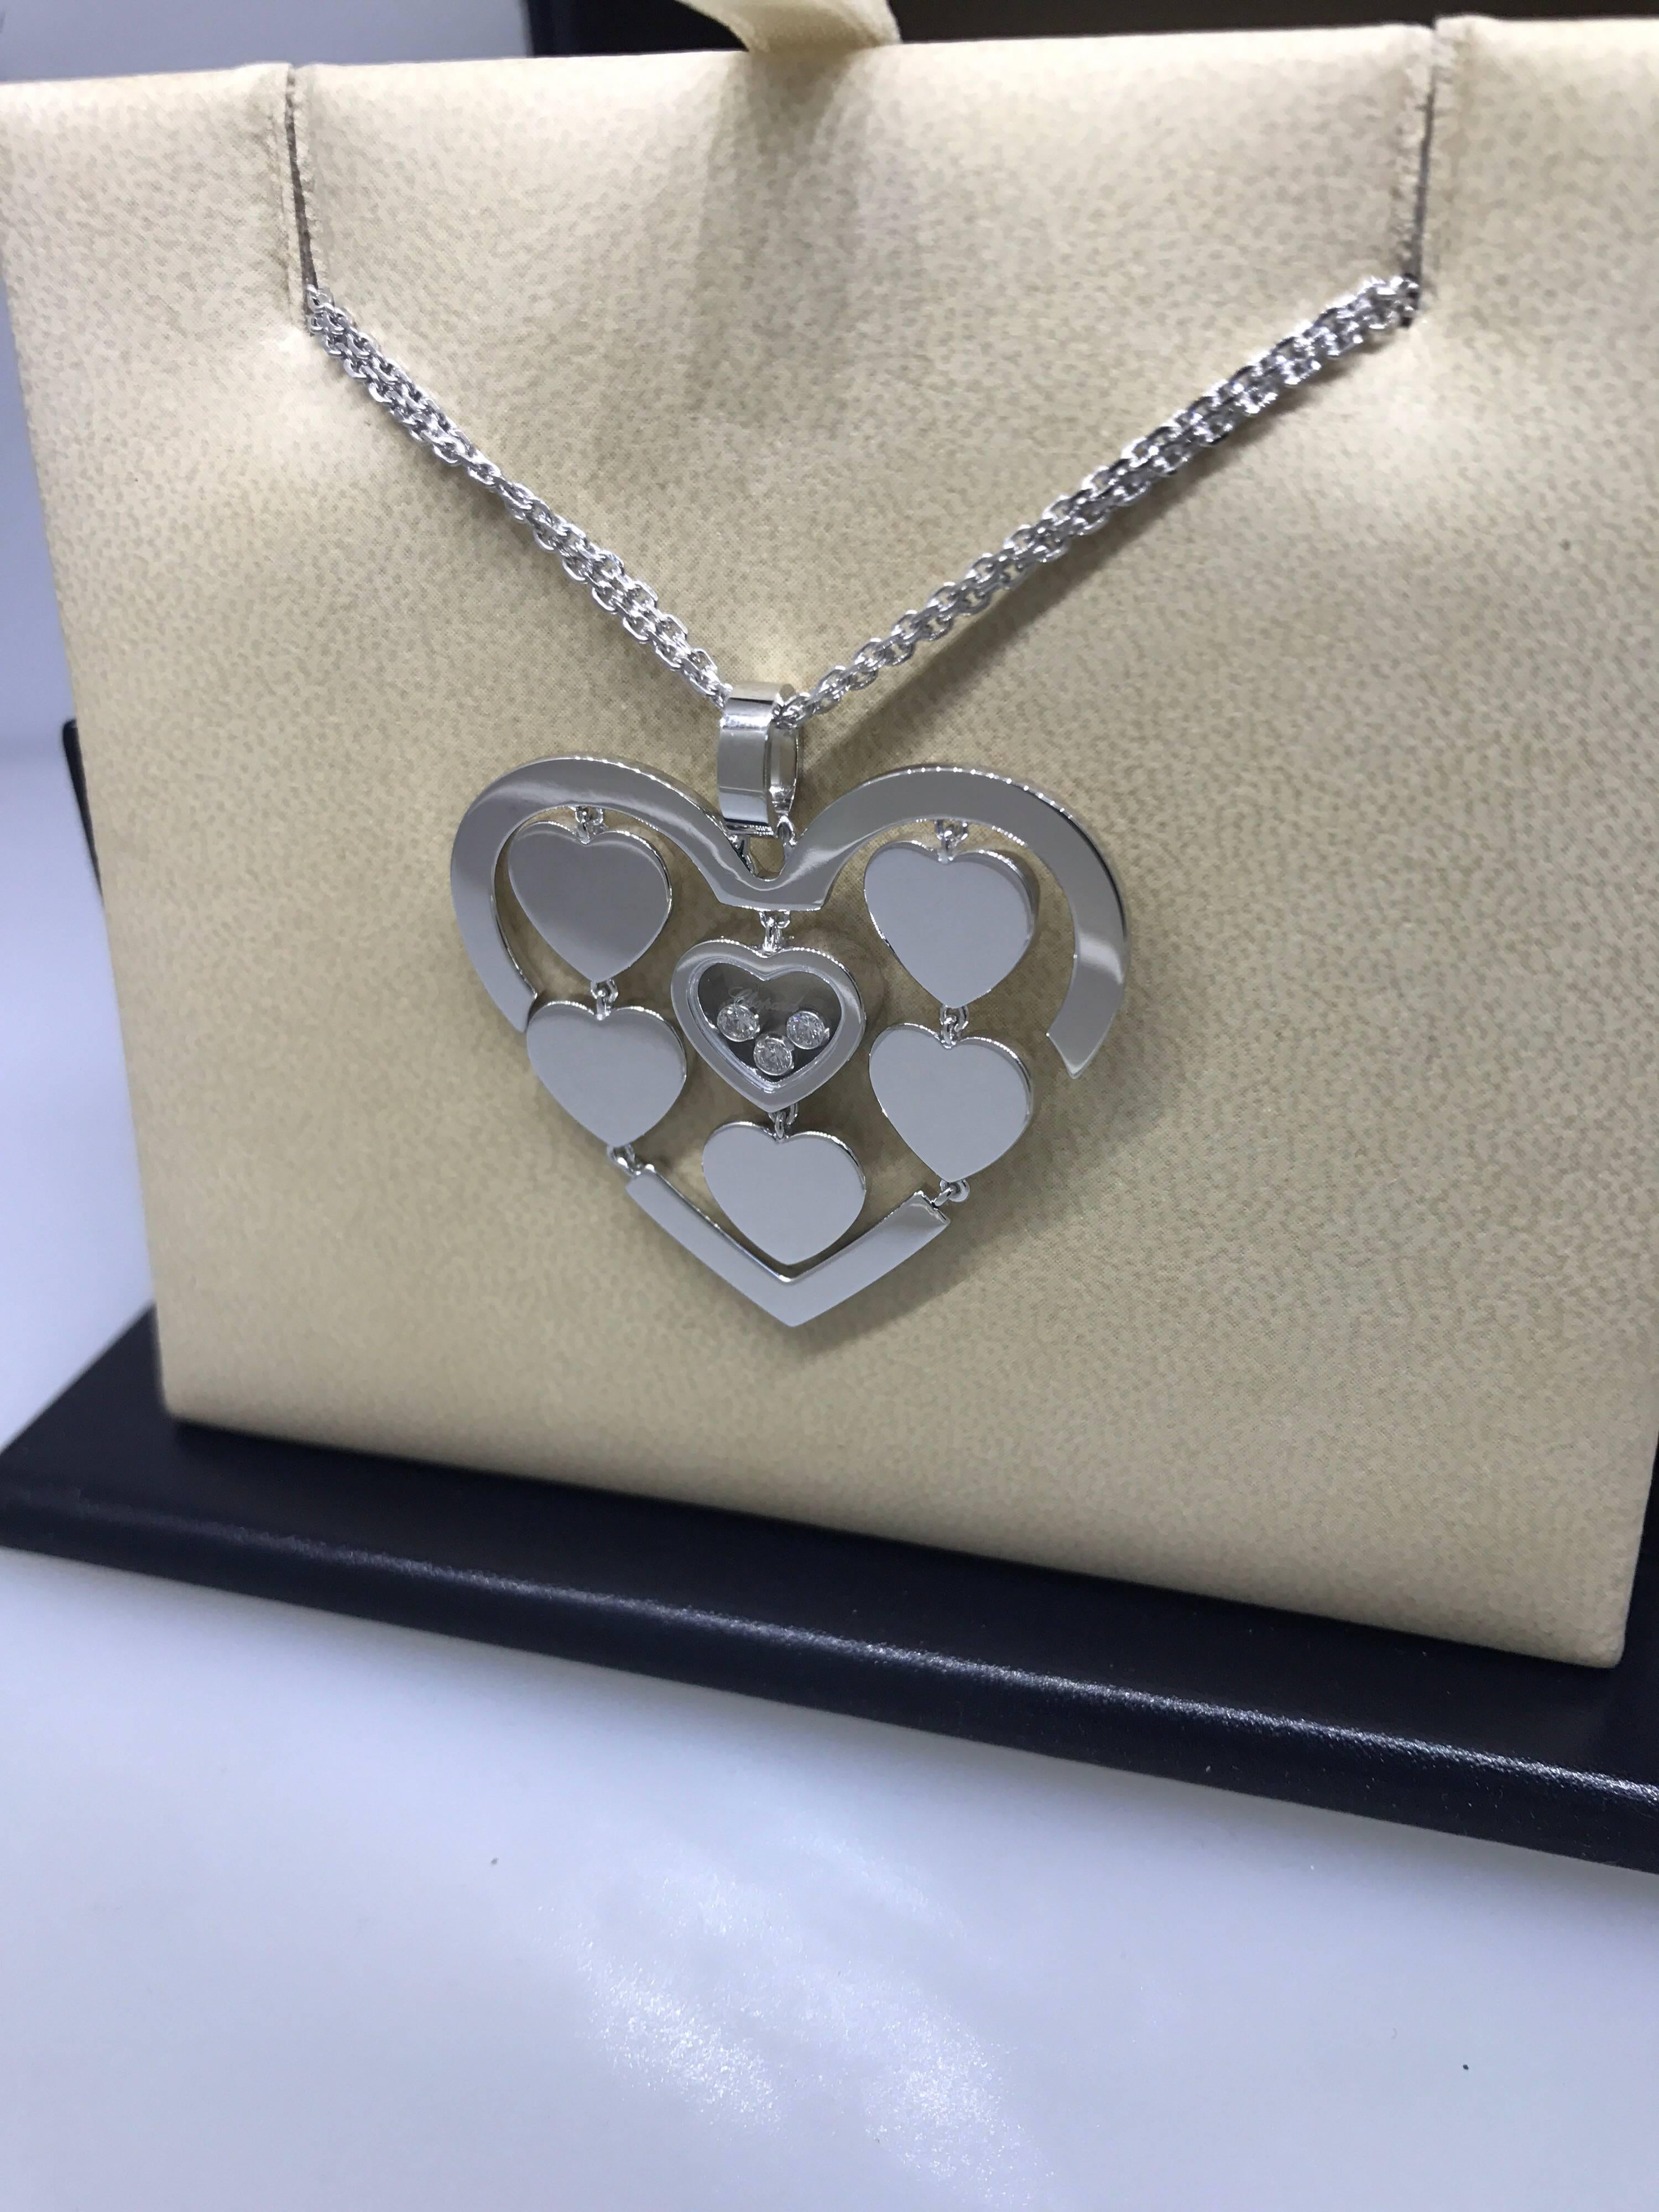 Chopard Amore Hearts Pendant Necklace

Model Number: 79/7220-1001

100% Authentic

Brand New

Comes with original Chopard box, certificate of authenticity and warranty, and jewels manual

18 Karat White Gold (24.60gr)

3 Floating Diamonds (.17